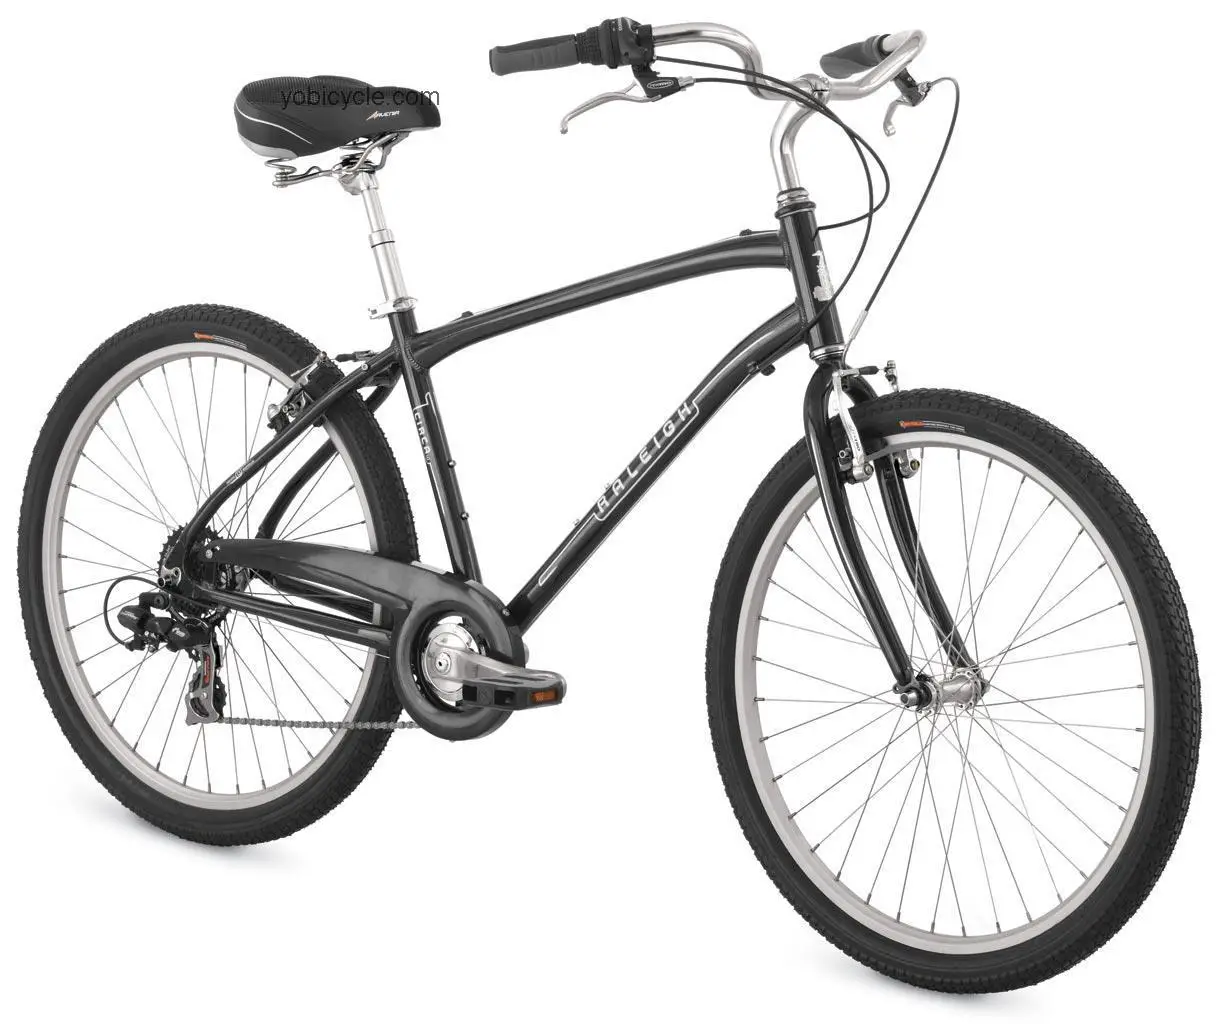 Raleigh  Circa 1.0 Technical data and specifications